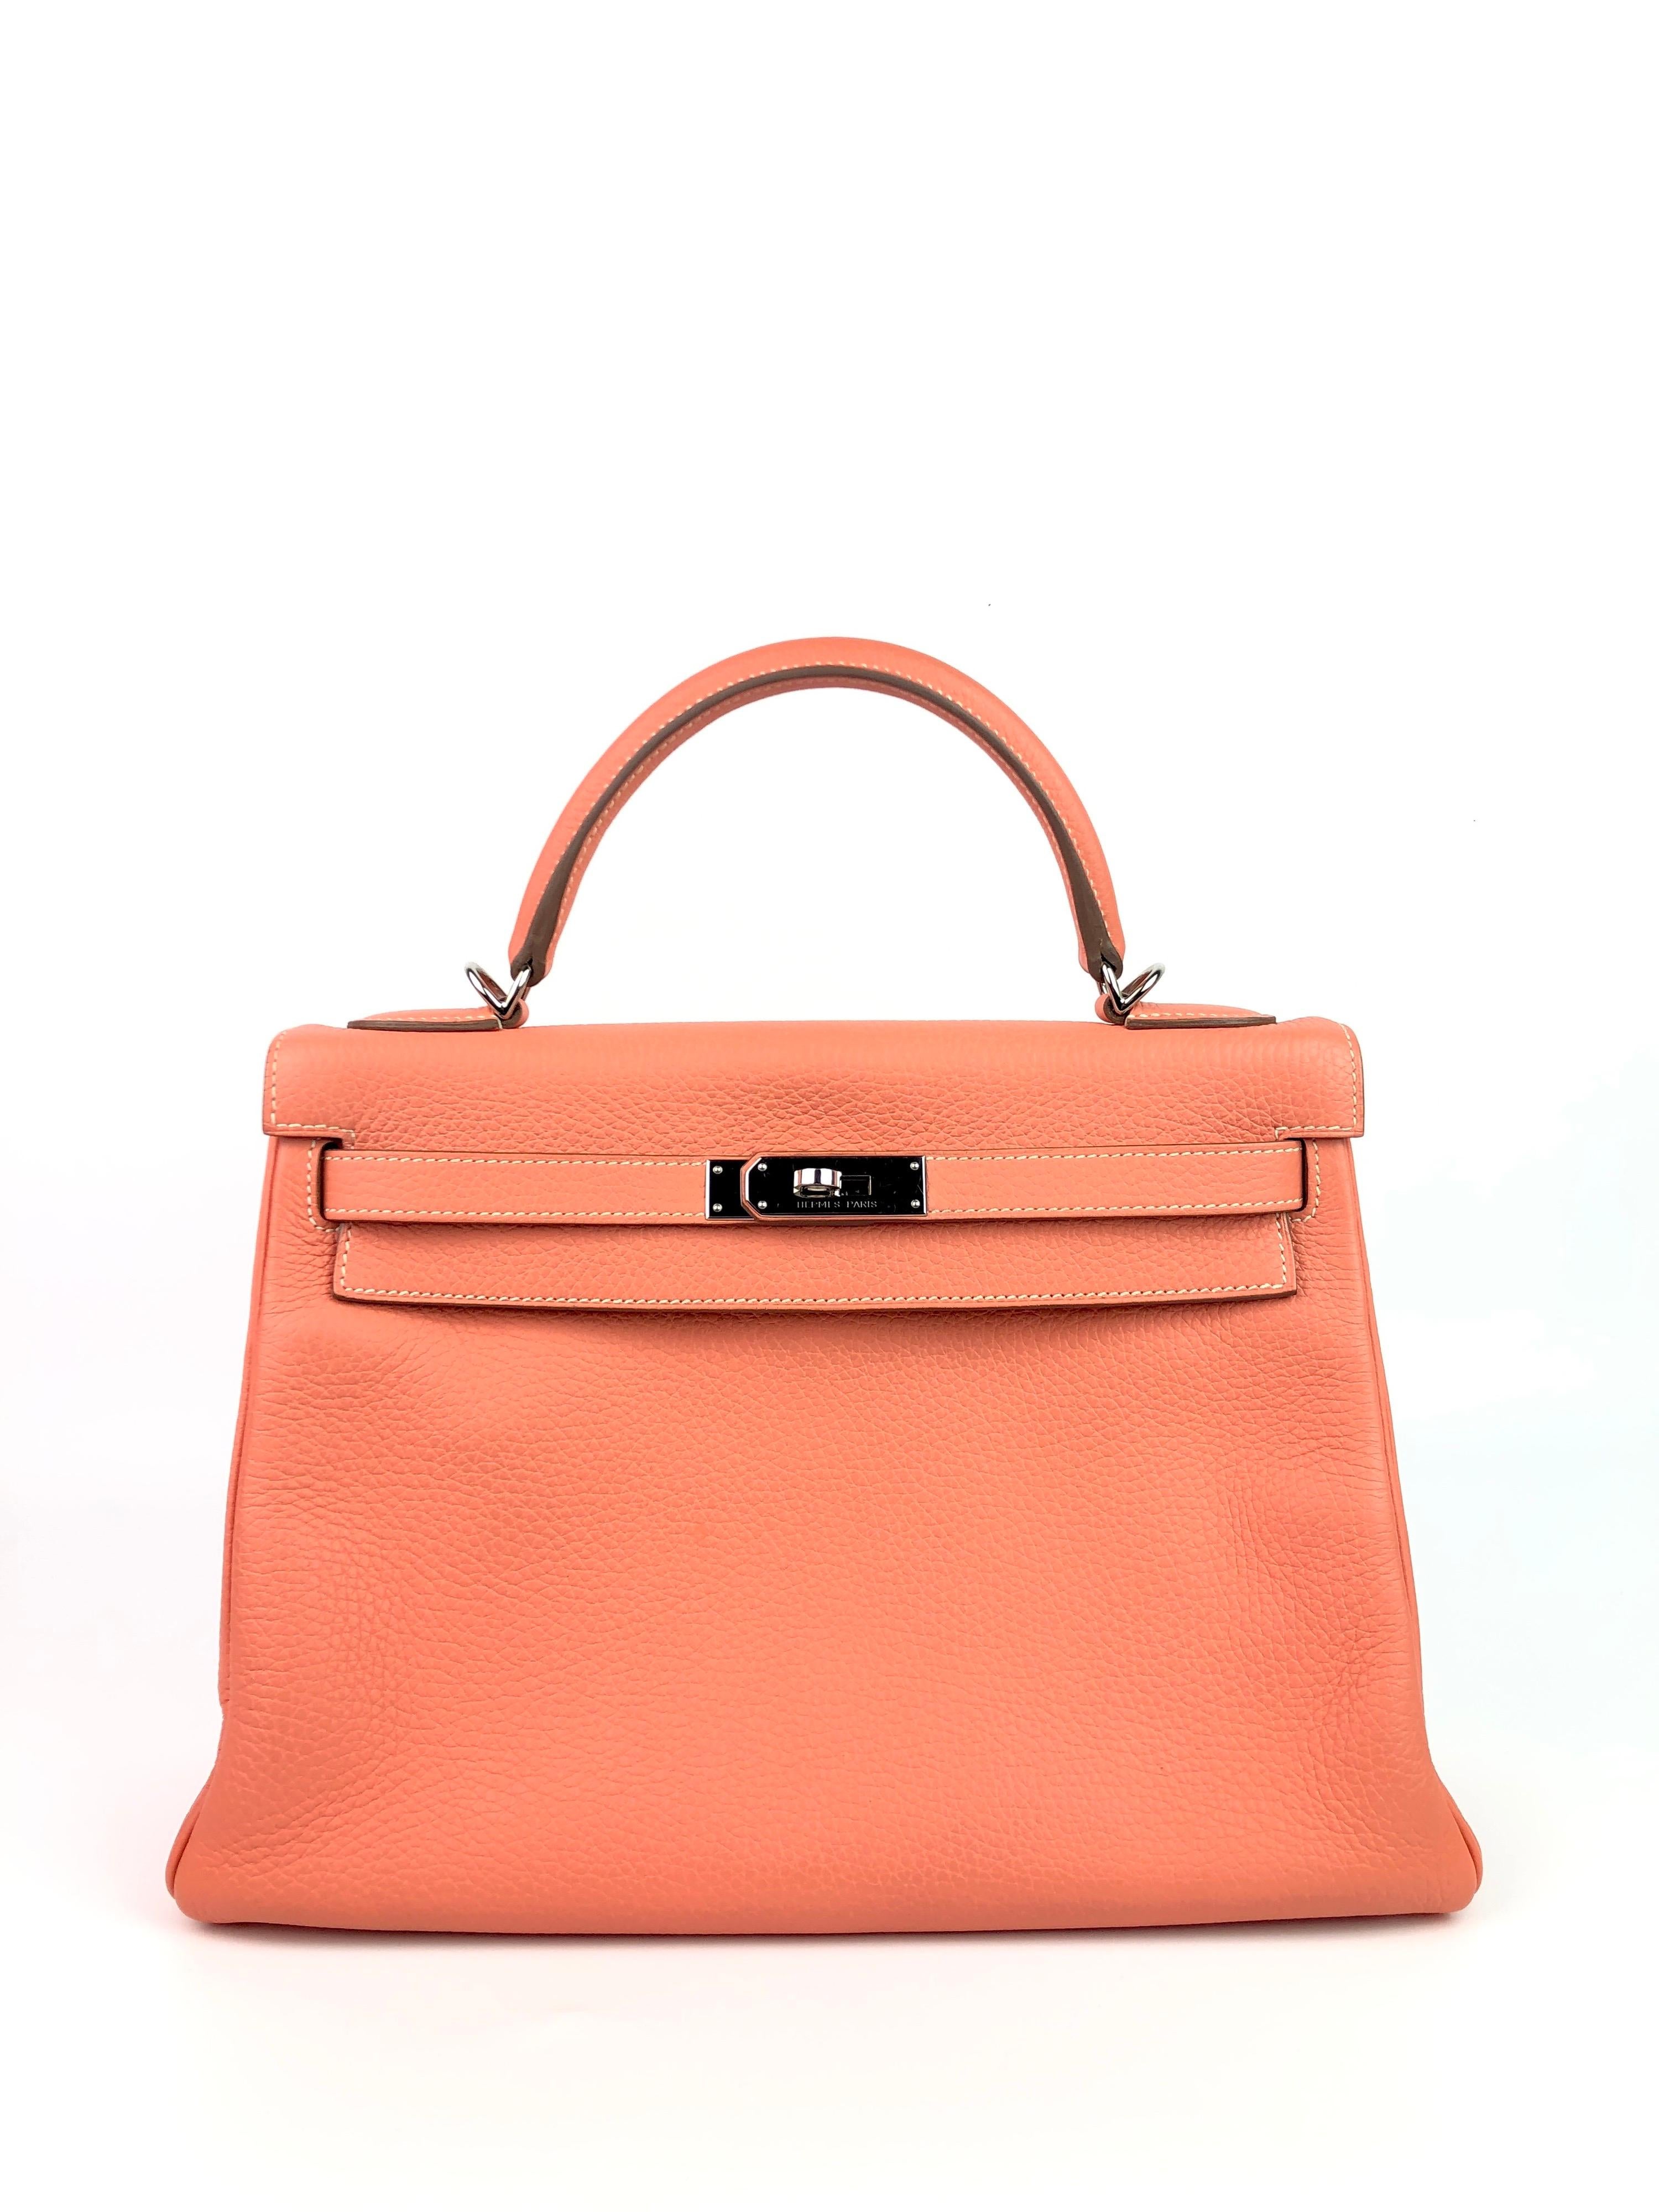 Hermes Kelly 32 Crevette Pink Orange Togo Palladium Hardware. Q Stamp 2013. Excellent Condition, light hairlines on Hardware, Excellent corners and good Structure. 

Shop with Confidence from Lux Addicts. Authenticity Guaranteed! 